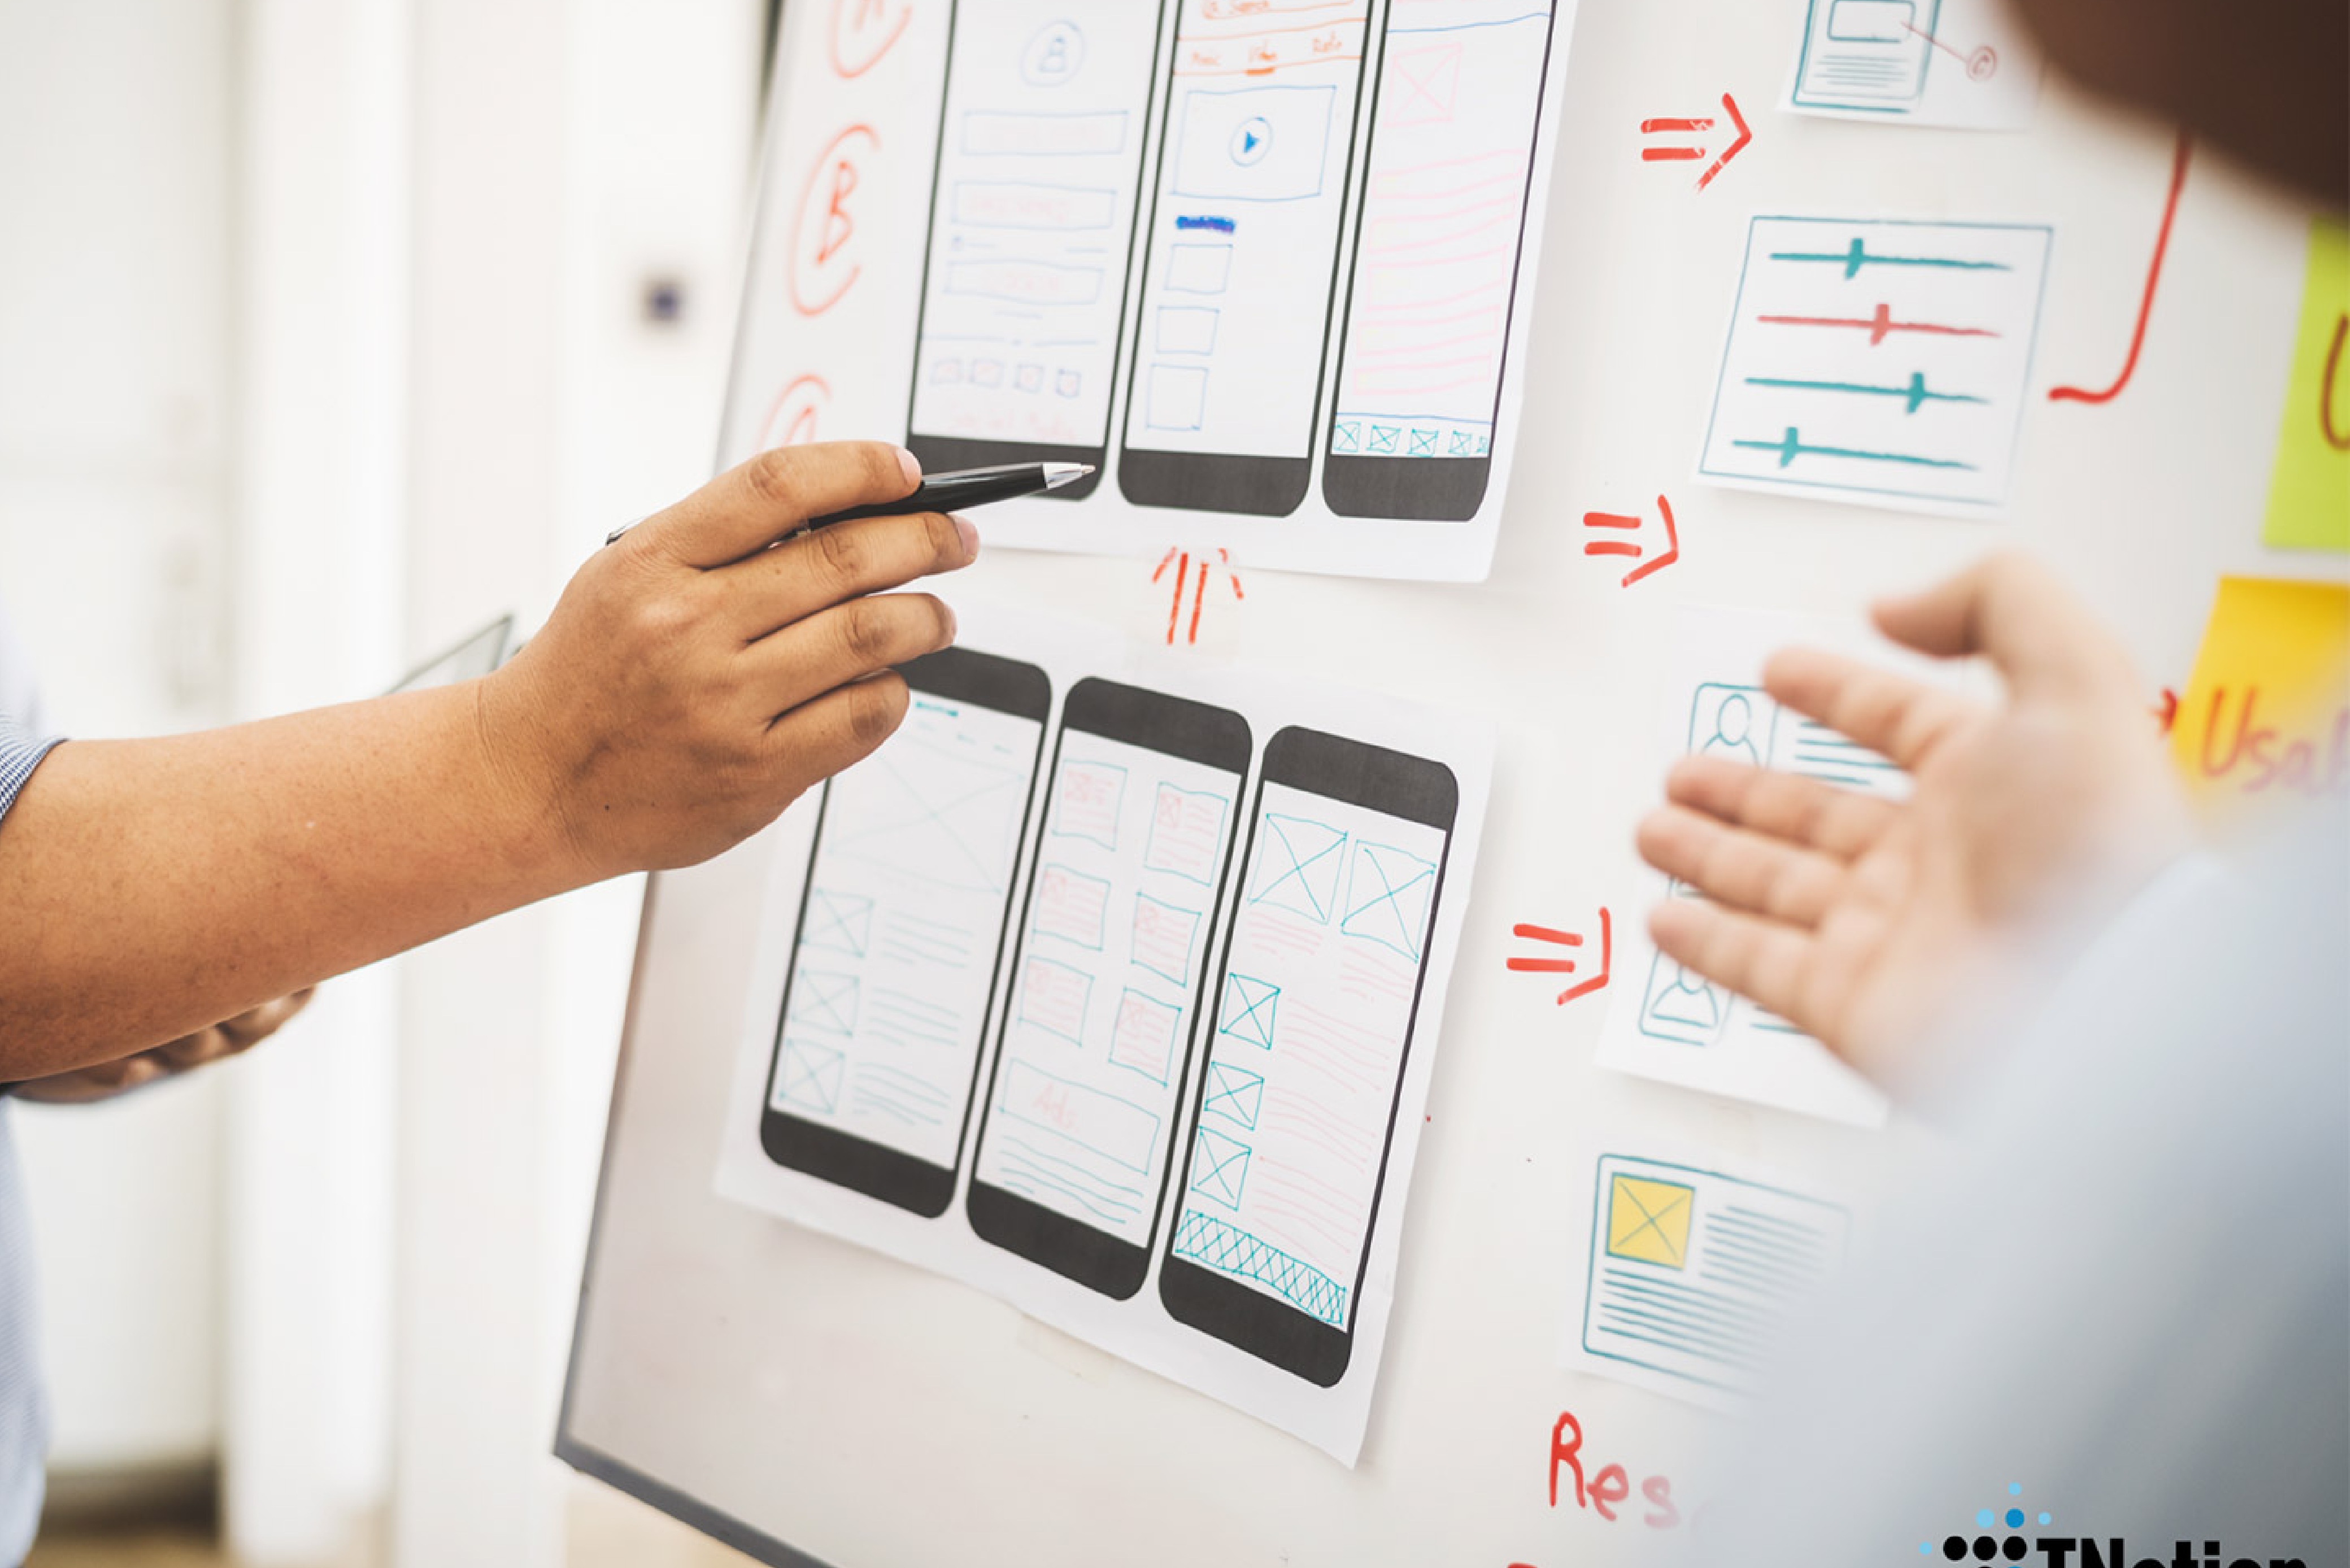 Mobile App Development Process: Step-by-Step Guide for 2023